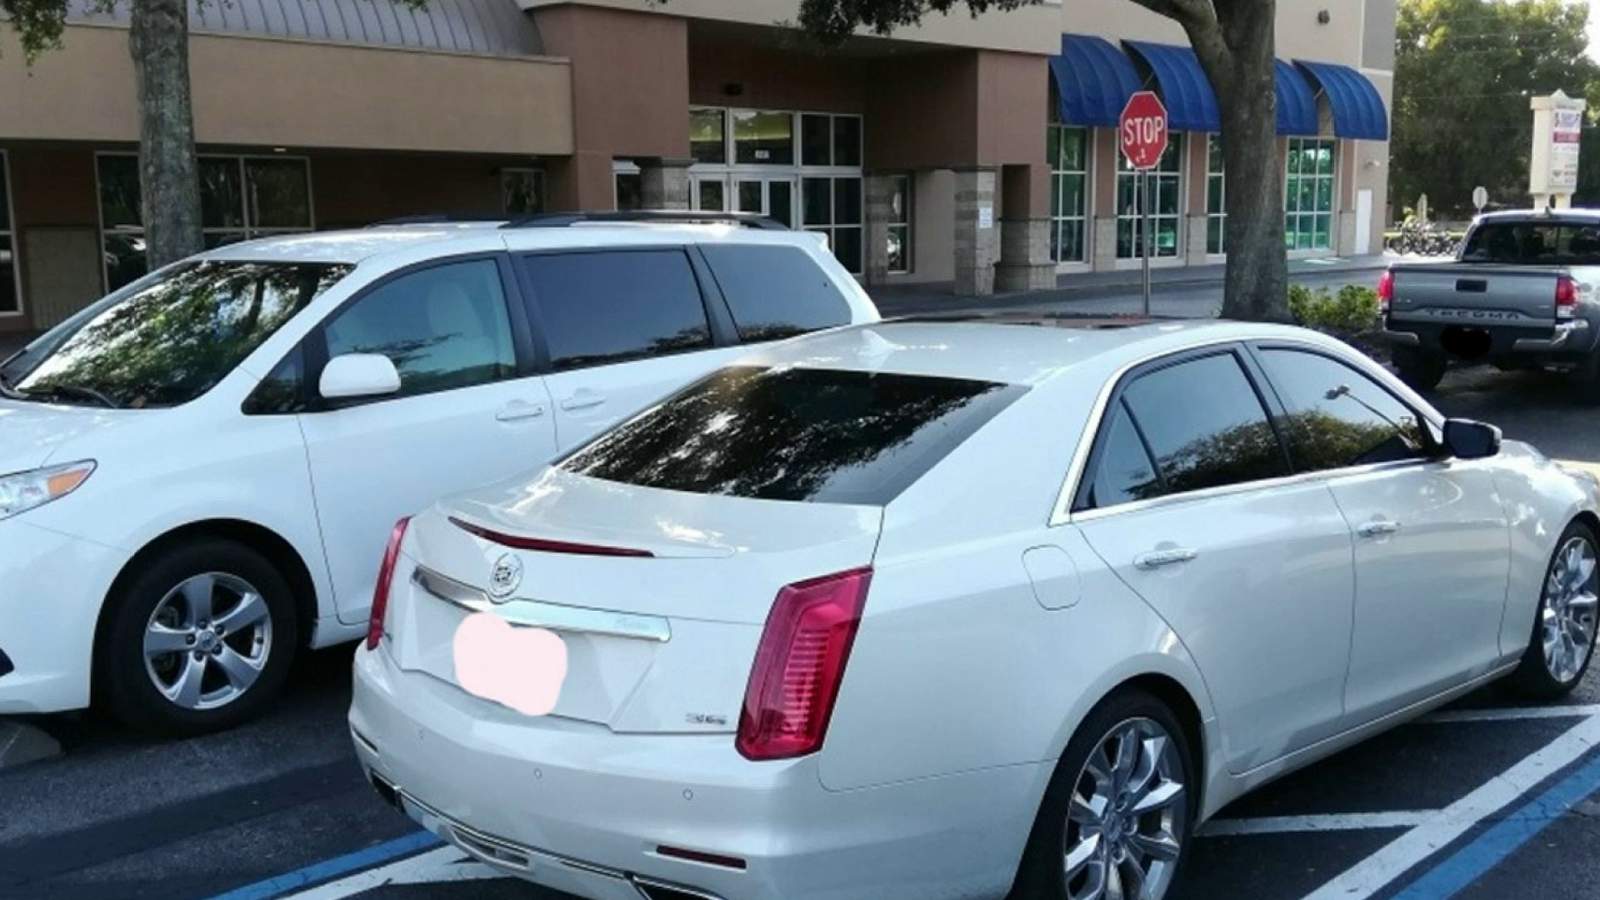 What the Honk: Parking in a loading zone and tinted windows in Florida